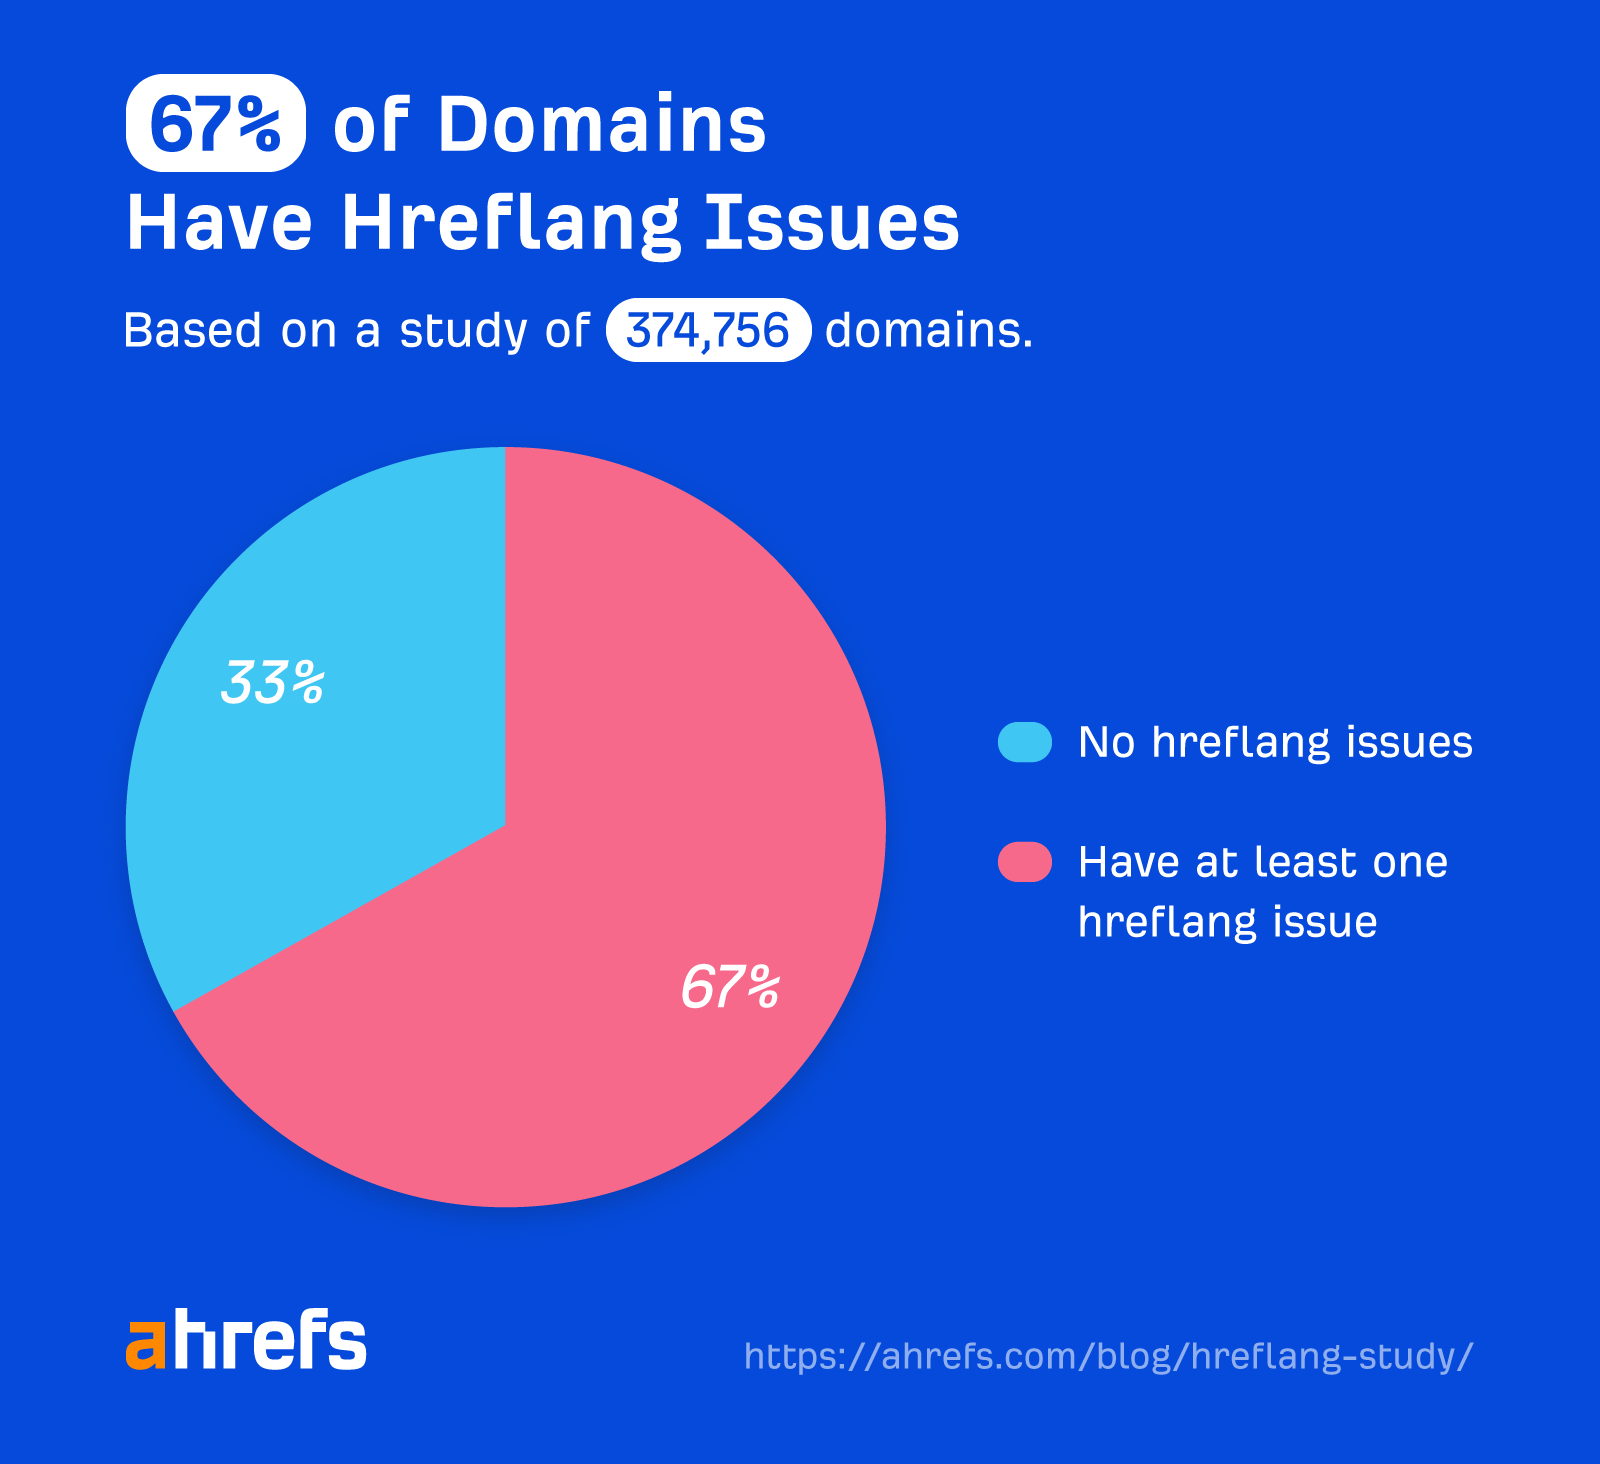 67% of domains have hreflang issues across 374,756 domains studied